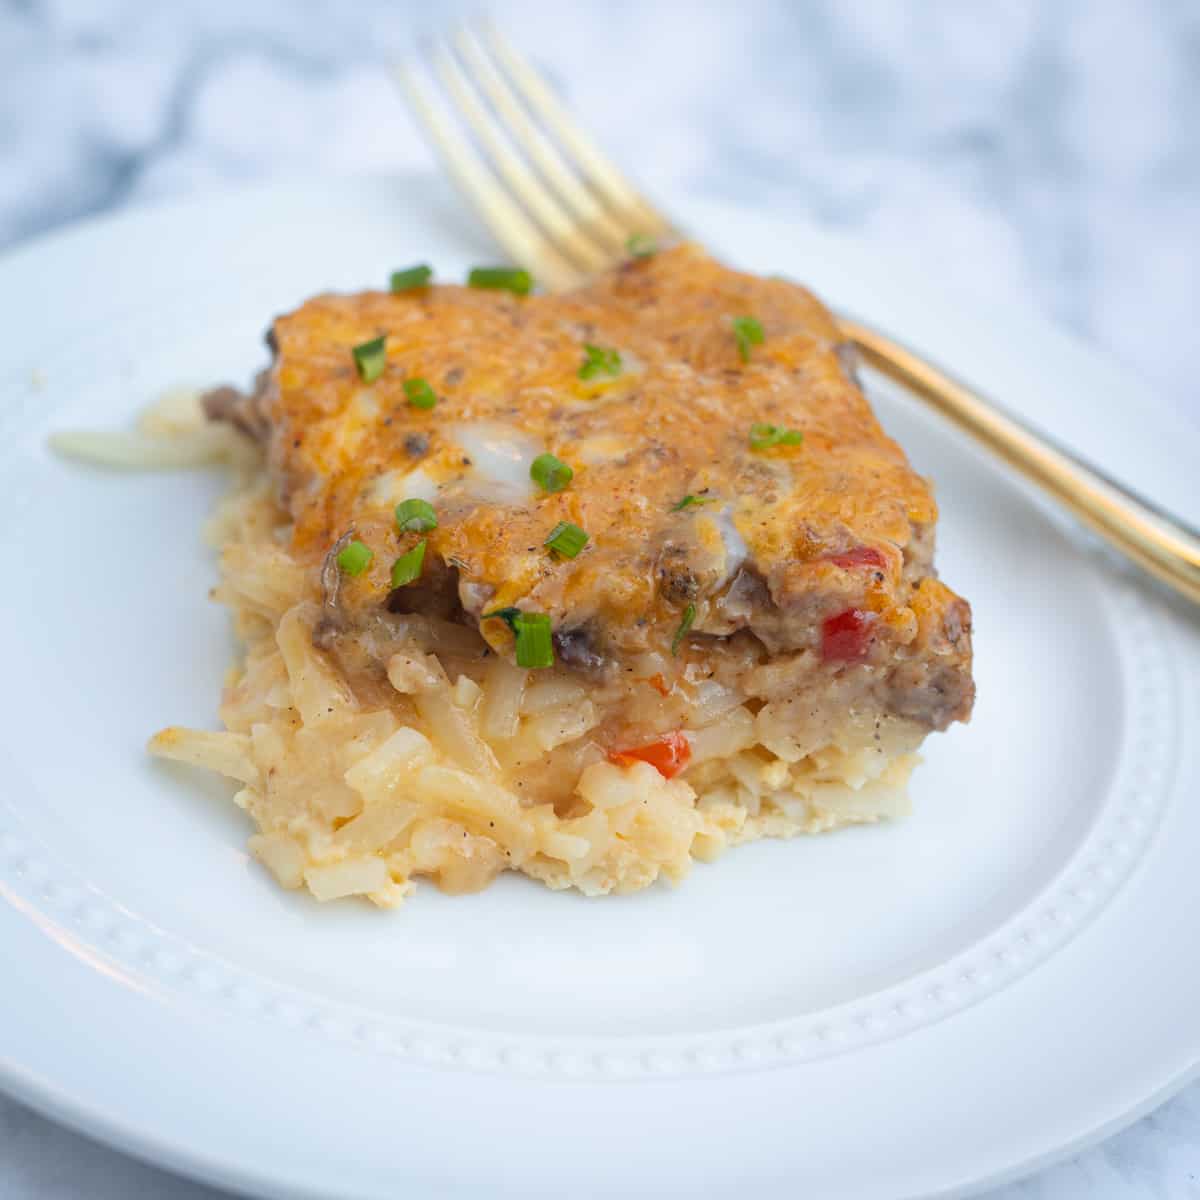 A square of egg and sausage gravy casserole on a plate. A fork is resting on the side. The casserole is orange in color and topped with chopped chives.